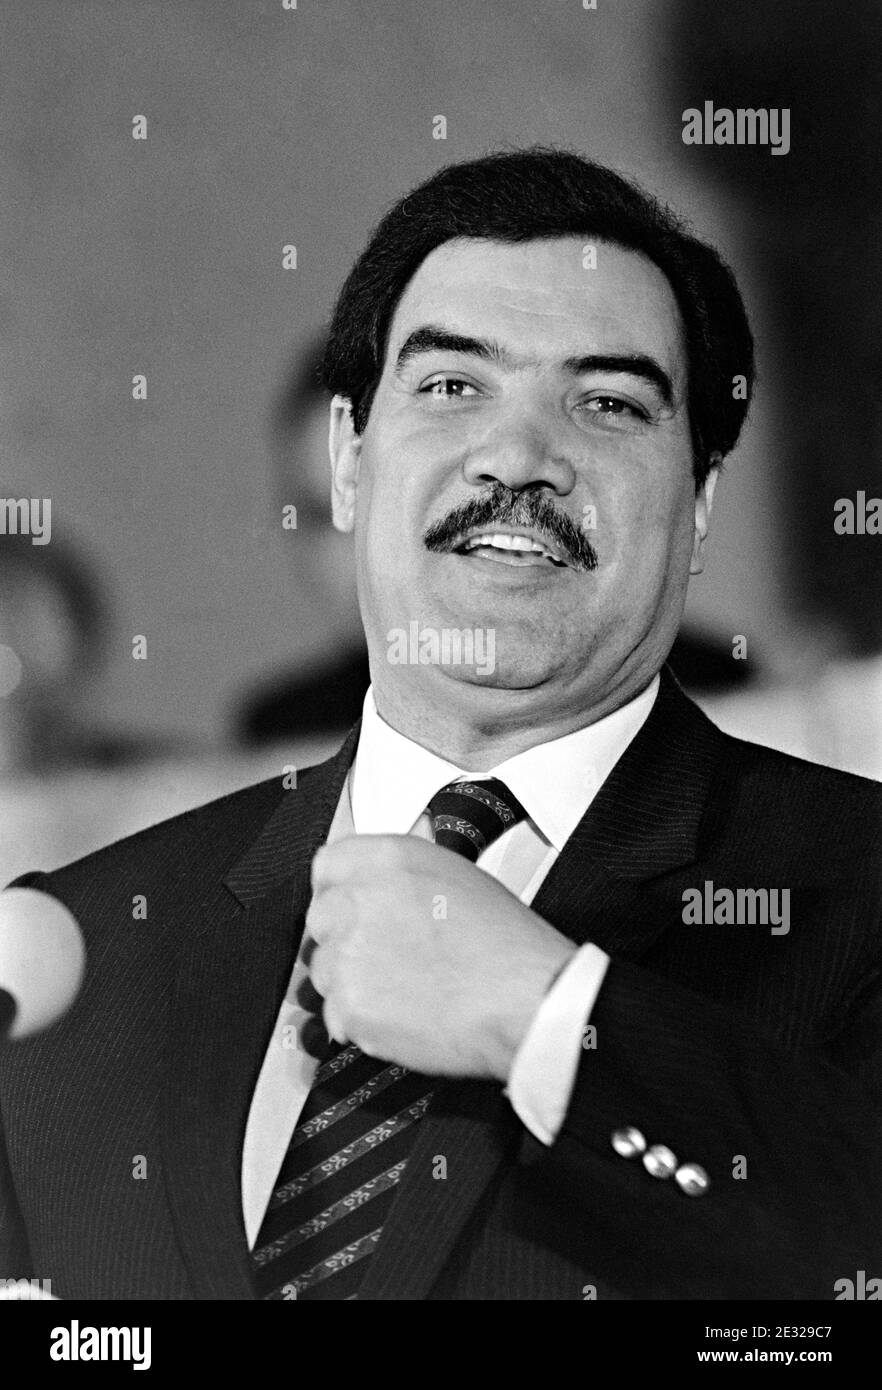 Afghan President Mohammed Najibullah delivers an address to the Afghan Loya Jirga or grand assembly of delegates May 24, 1989 in Kabul, Afghanistan. The two-day assembly is being held three month after the soviet troops withdrawal. Stock Photo